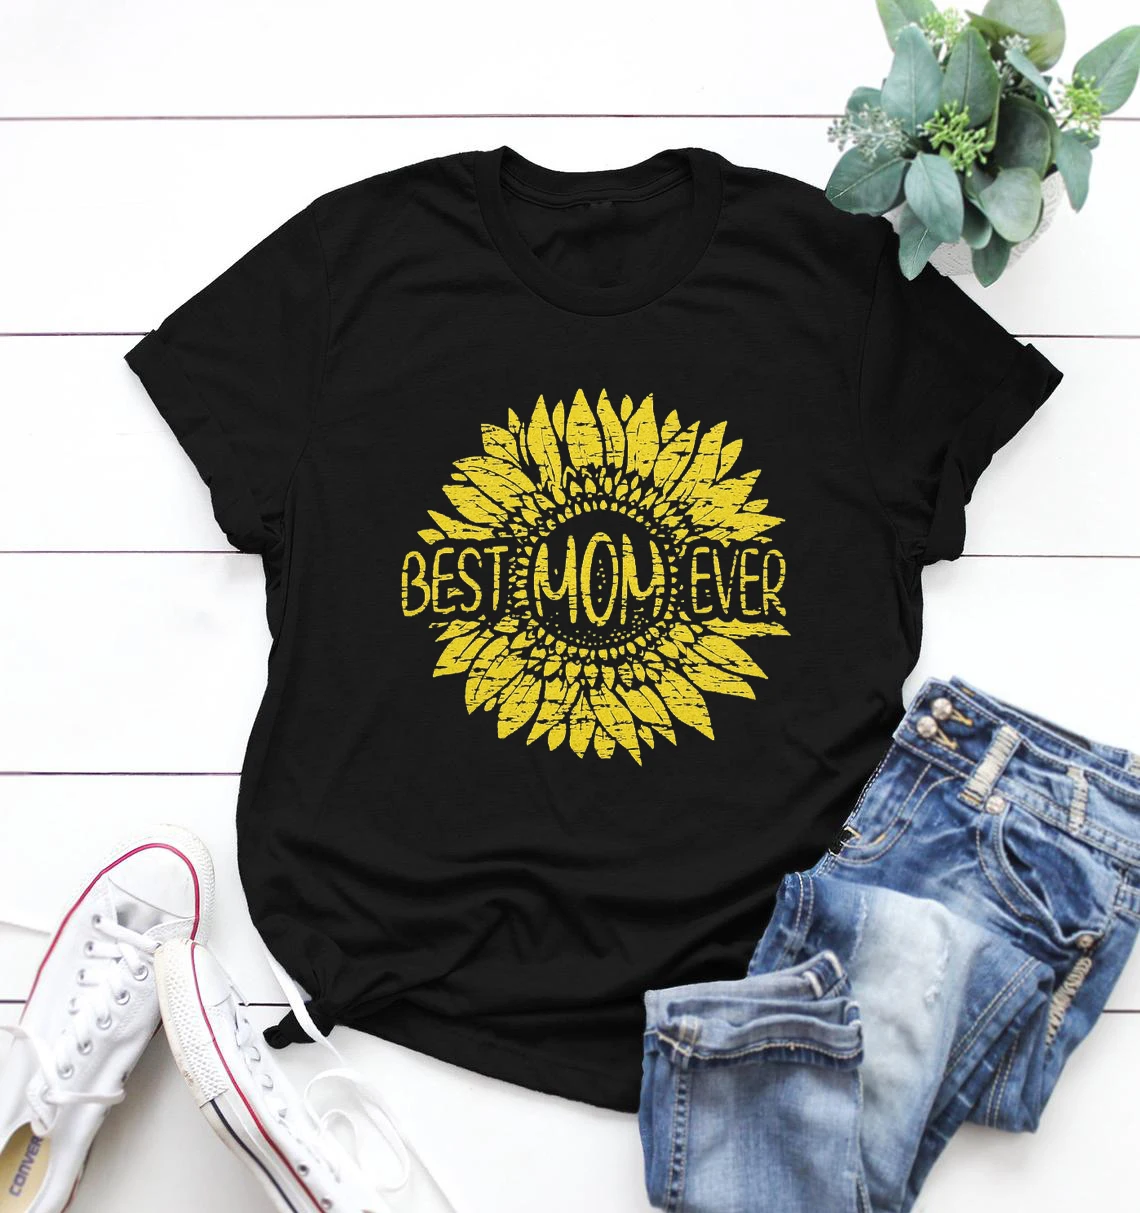 

2021 Hot Sale Best Mom Ever T-shirt Female Sunflower Graphic Short Sleeve Shirt Mother's Day Loose Women Tee Gift To Family